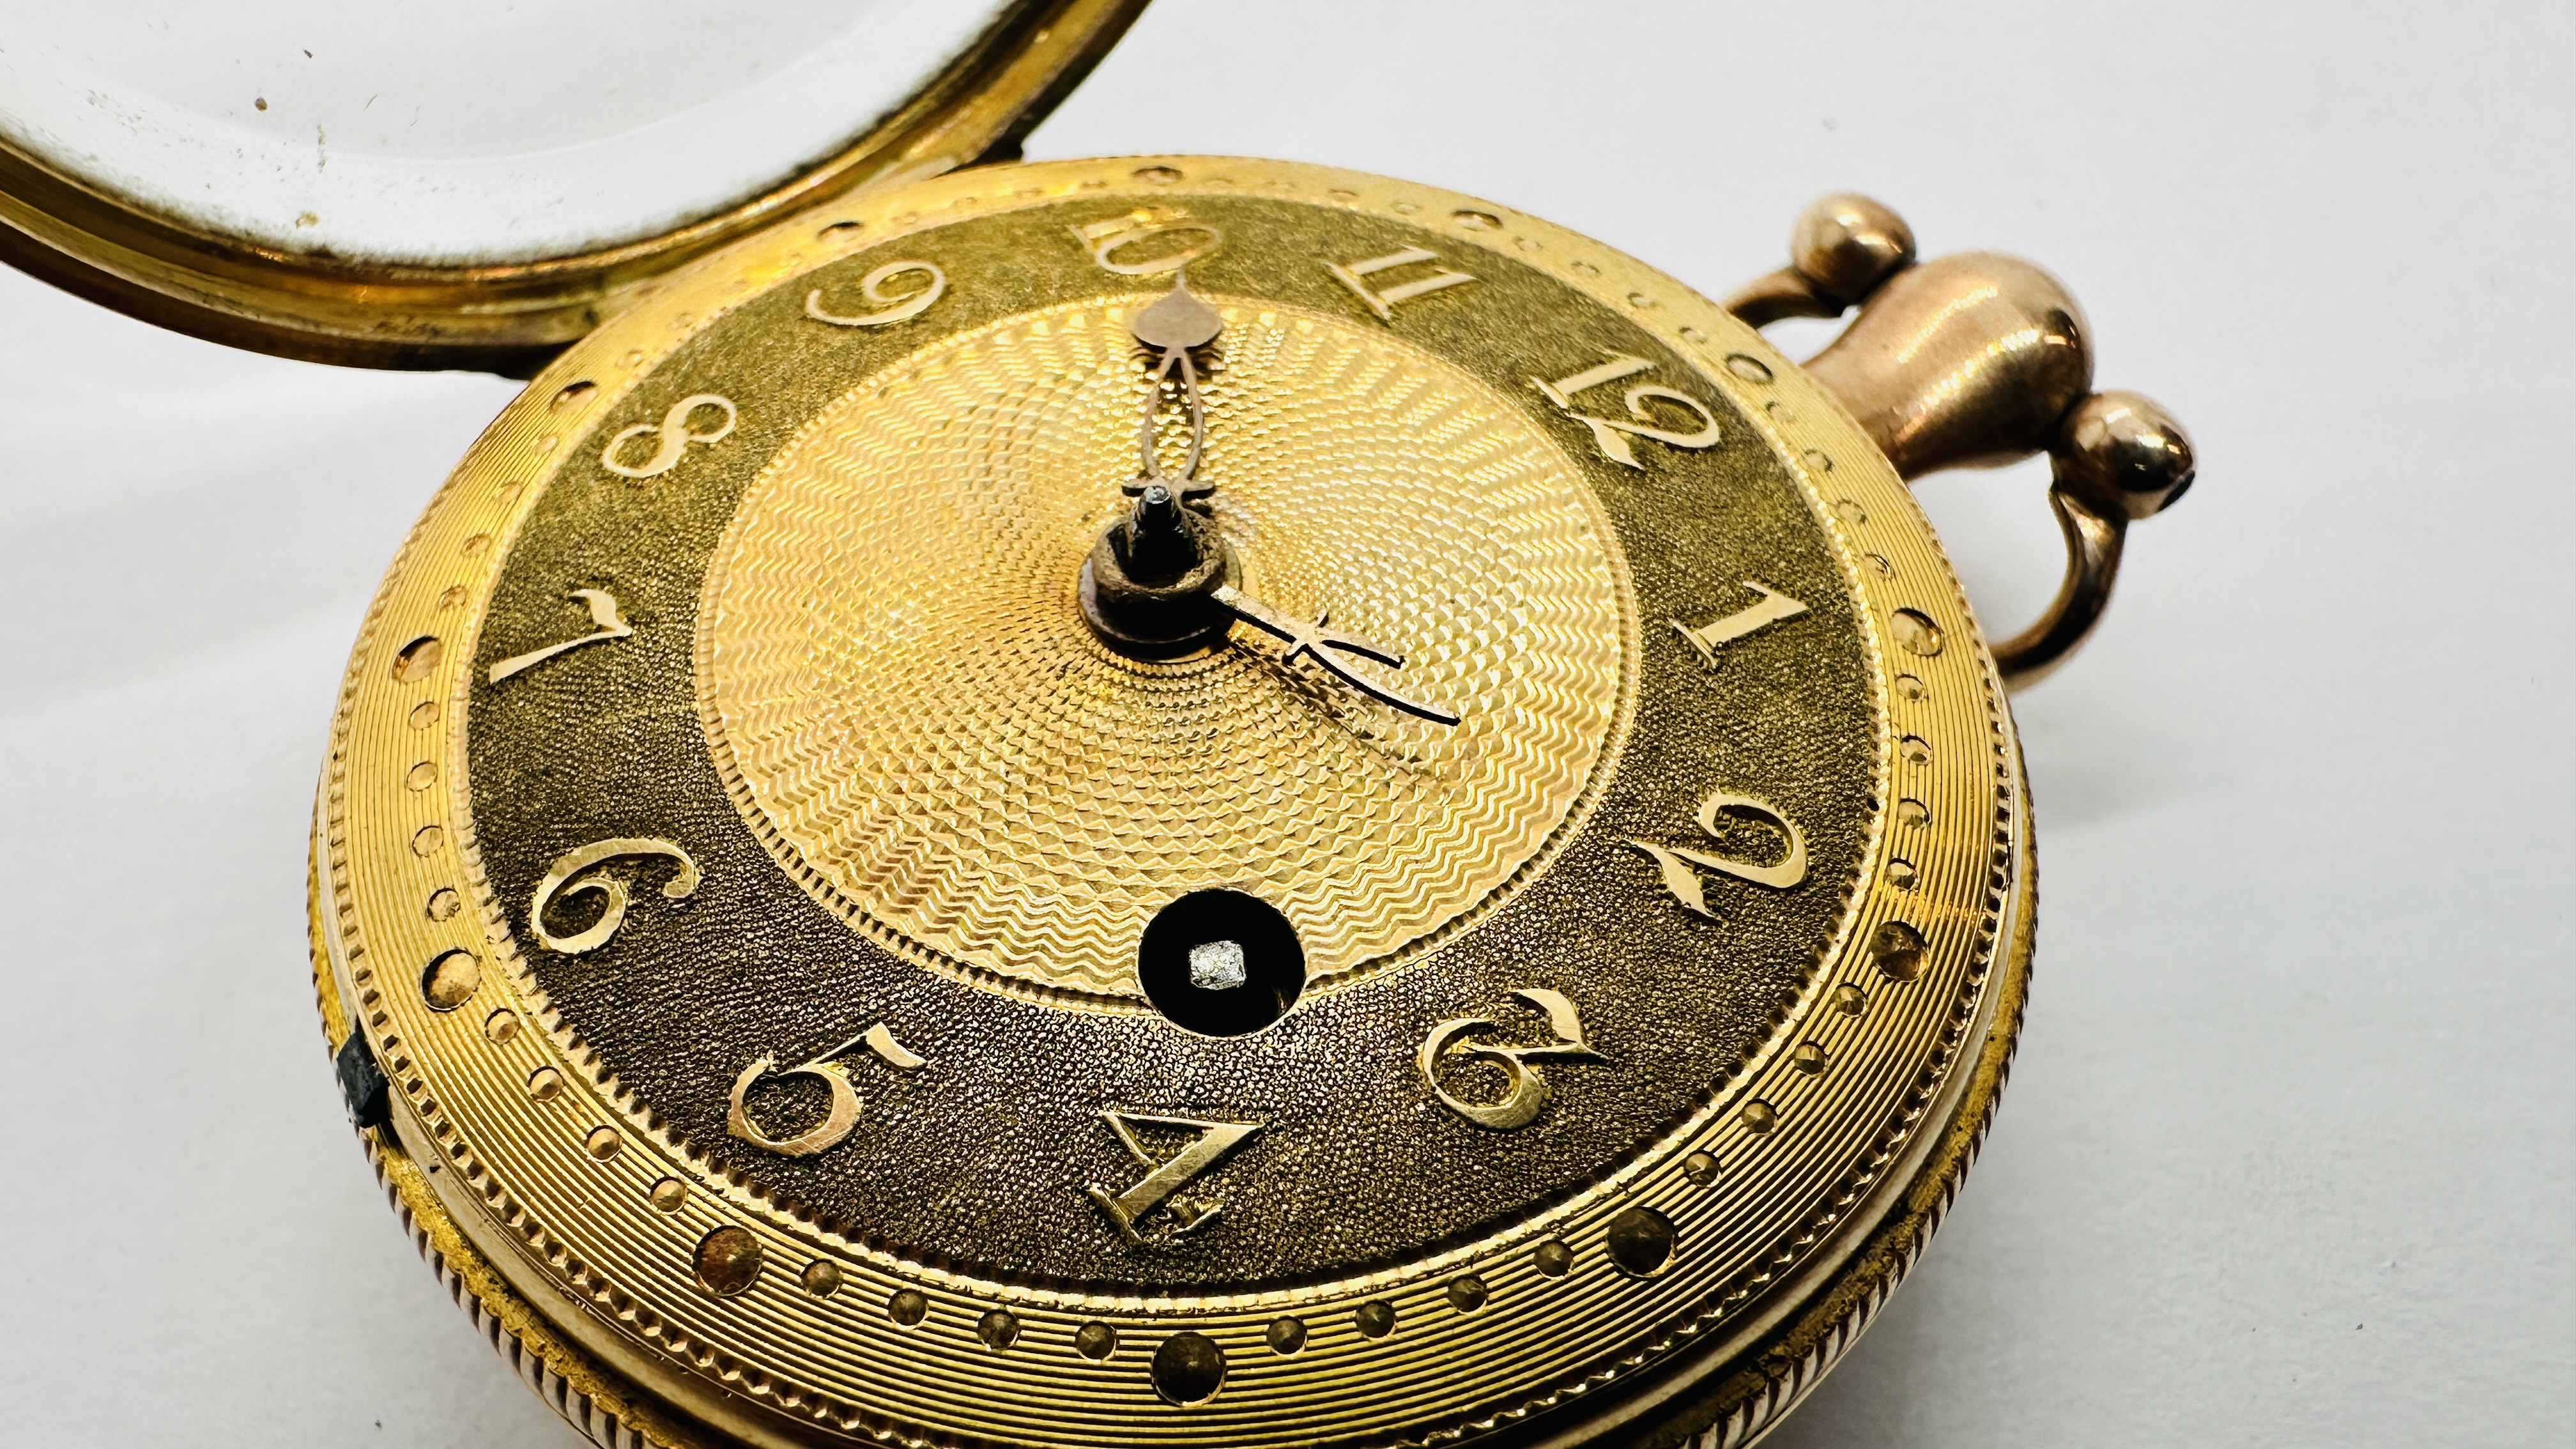 AN ANTIQUE 18CT GOLD CASED GENTS POCKET WATCH FUSSEE VERGE MOVEMENT INSCRIBED PAINGER? HOLBORN HILL - Image 19 of 33